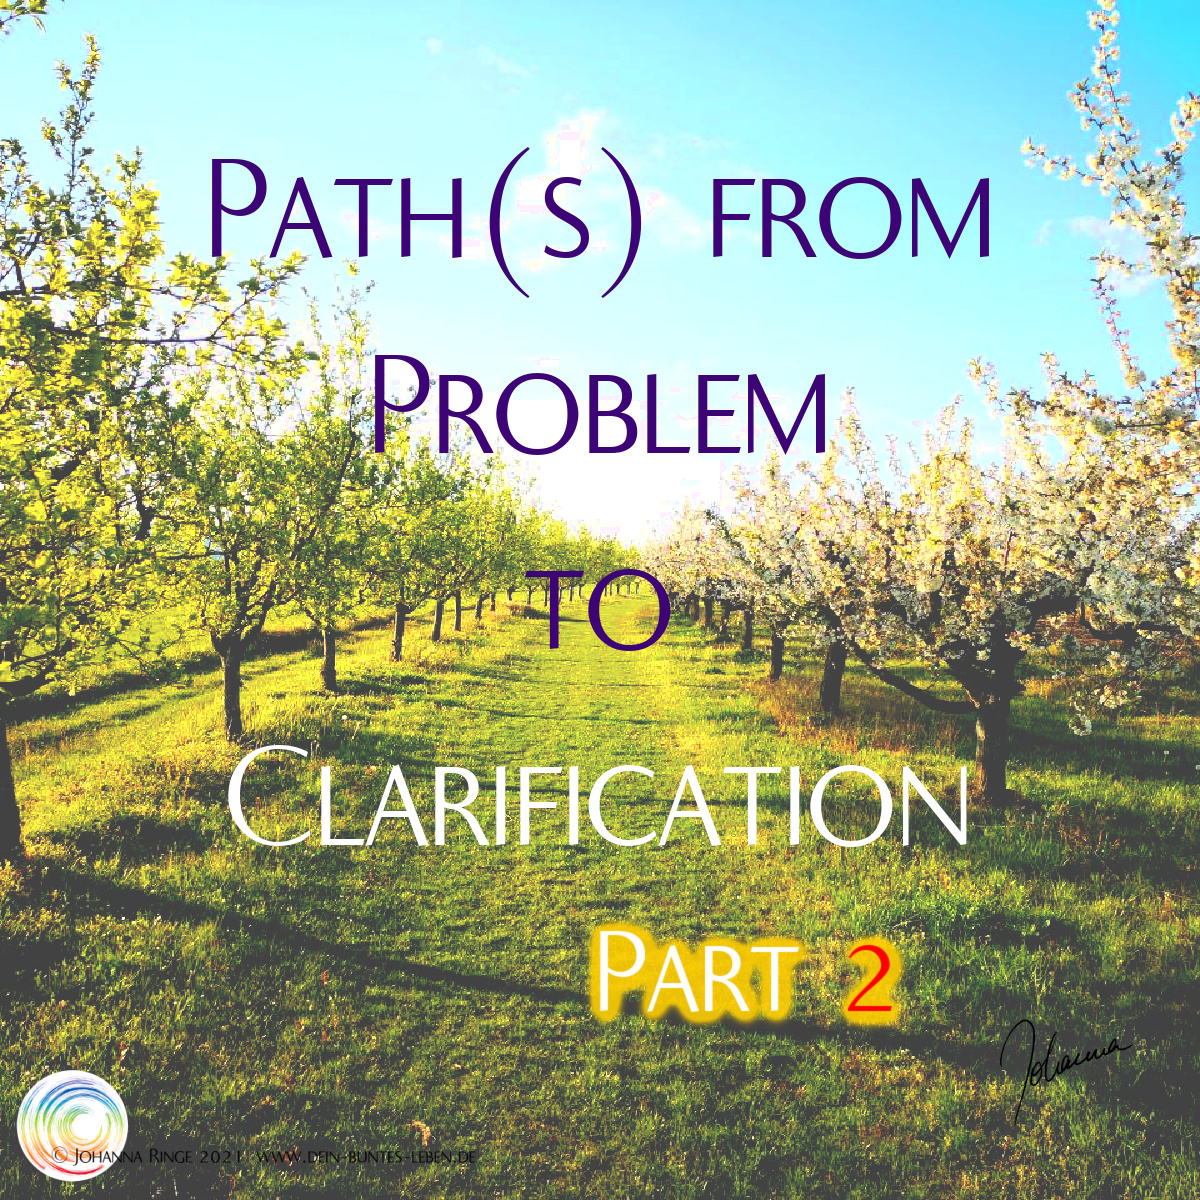 Paths from Problem to clarification Part 2 (text on photo of a flowering alleypath) ©Johanna Ringe 2021 www.johannaringe.com